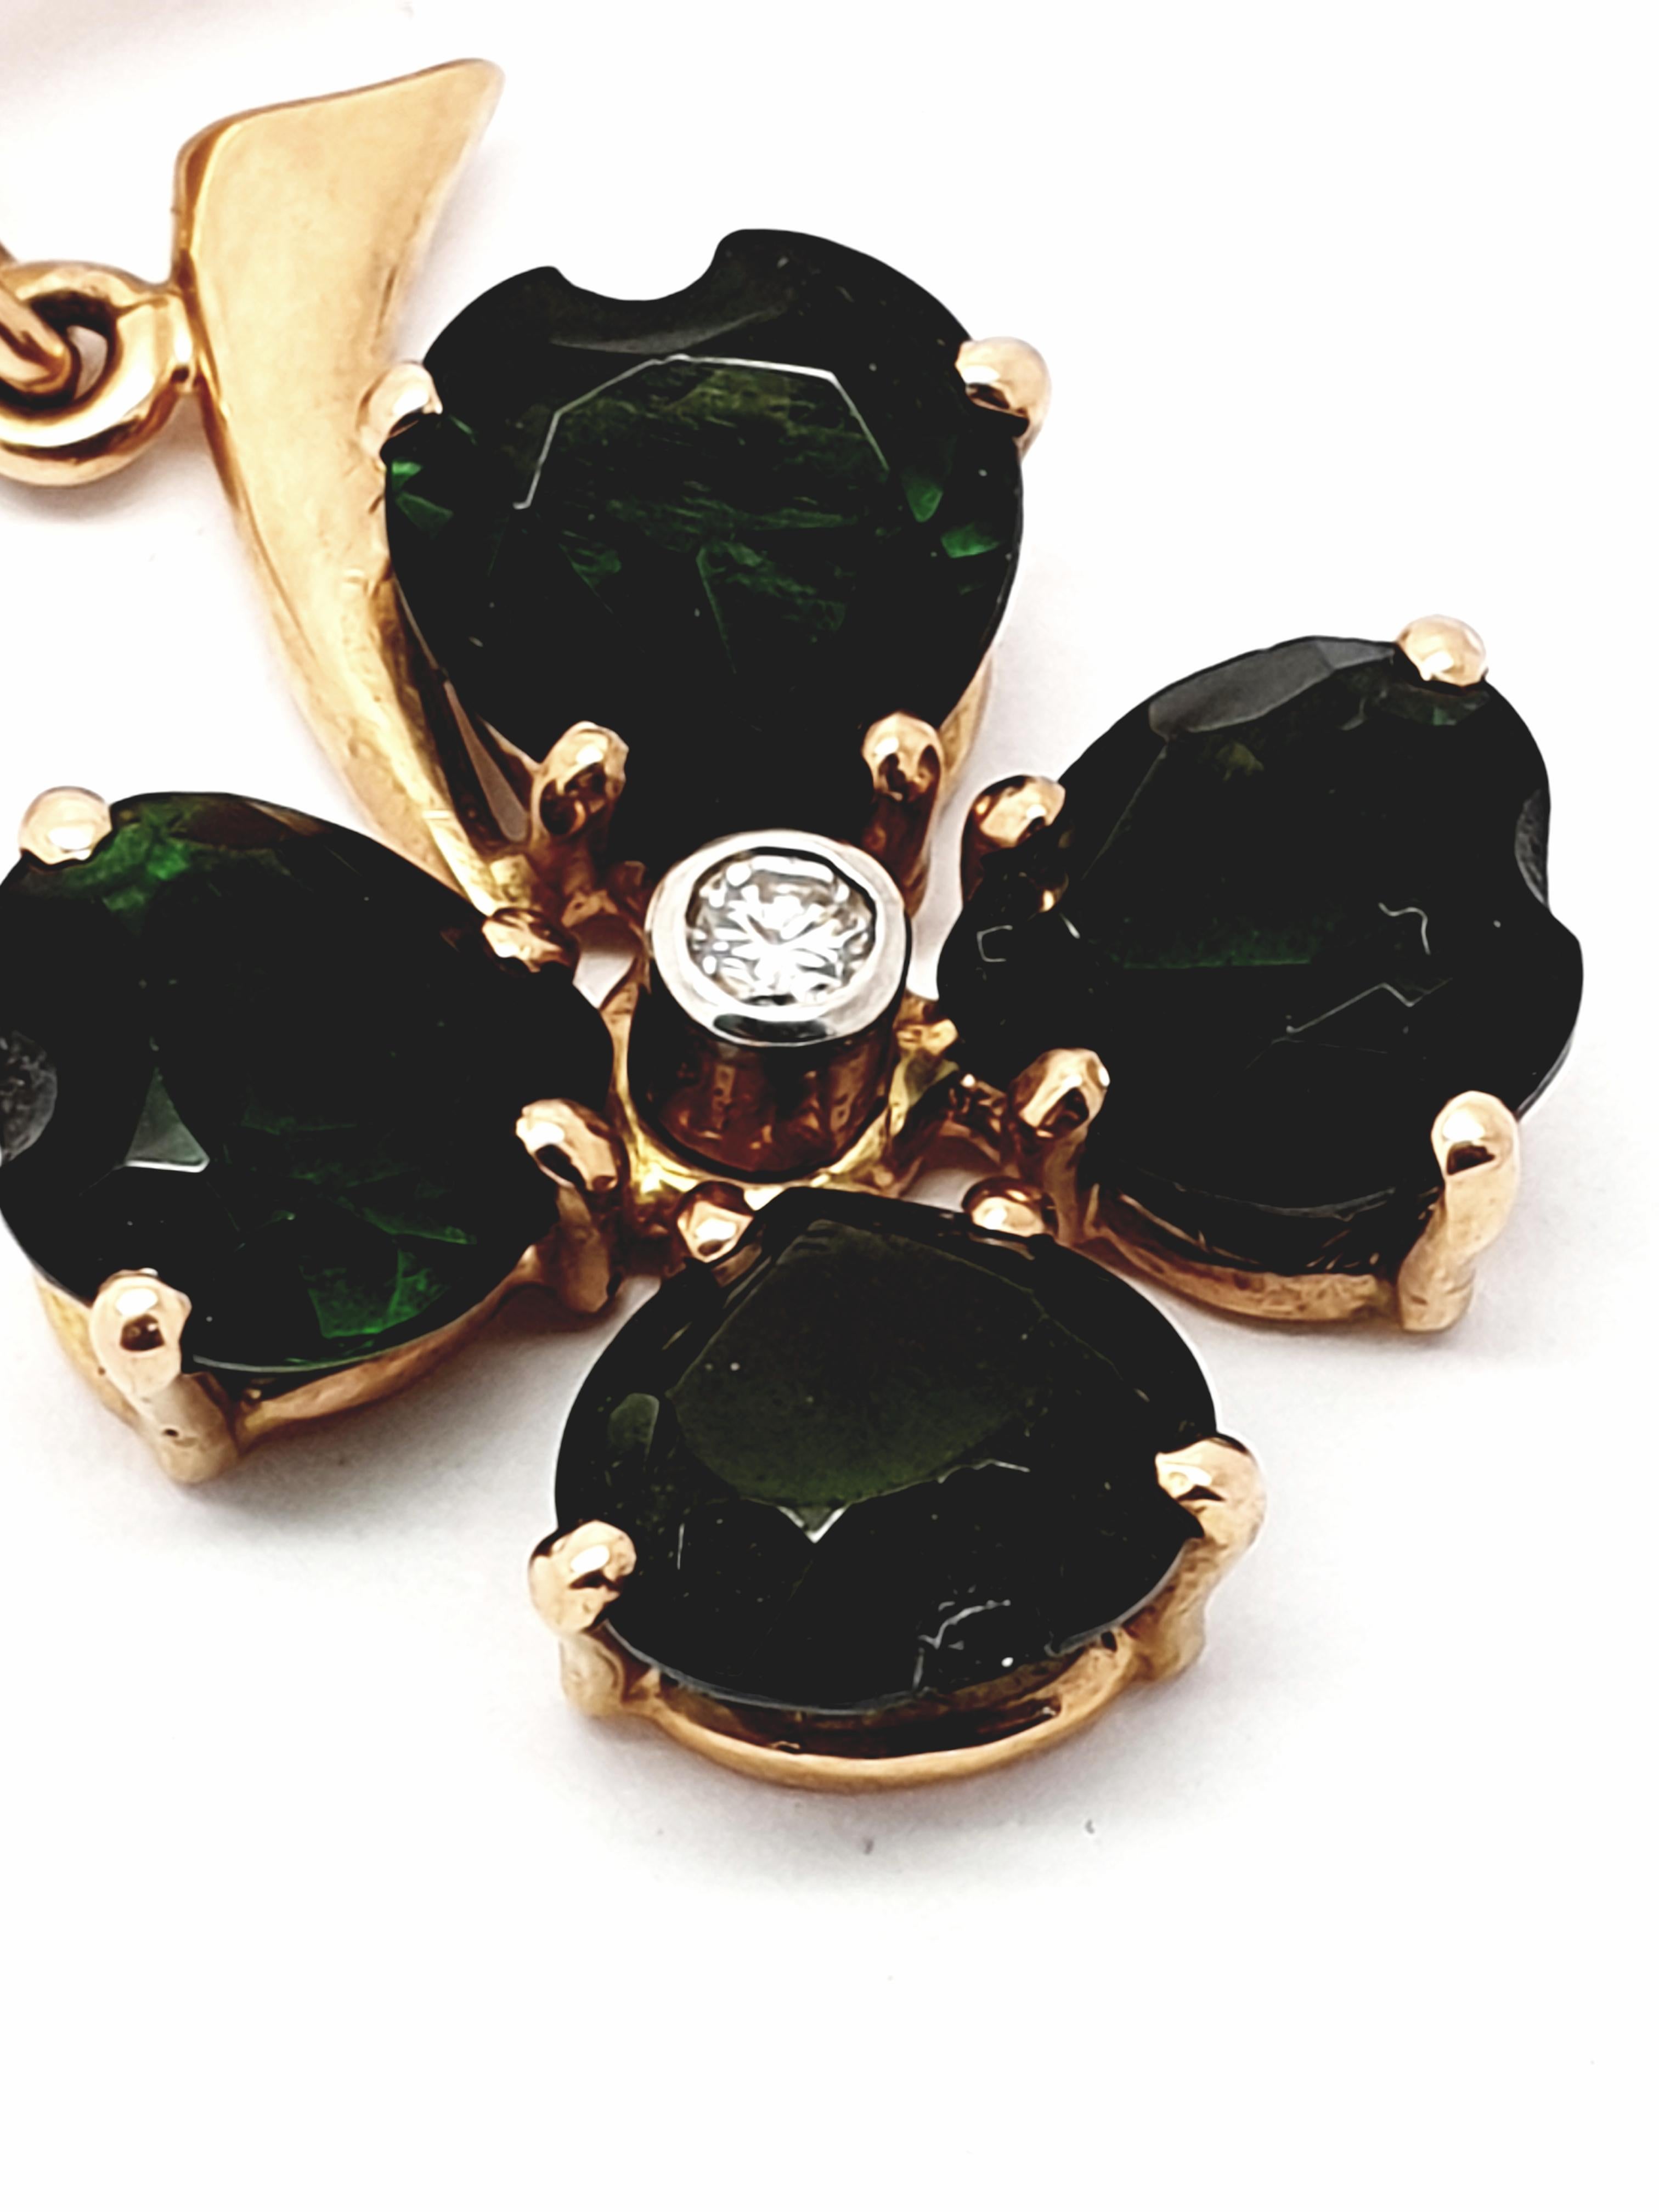 A  Beautiful 1940's 14 kt Gold Green Tourmaline Clover Shamrock ! Hand Crafted by a Master Art Jeweler ! Weighs approximately 5.4 grams. The setting and the  pin is 14 kt rose gold,hallmarked (see photos) . Green tourmaline stone leaves are carved